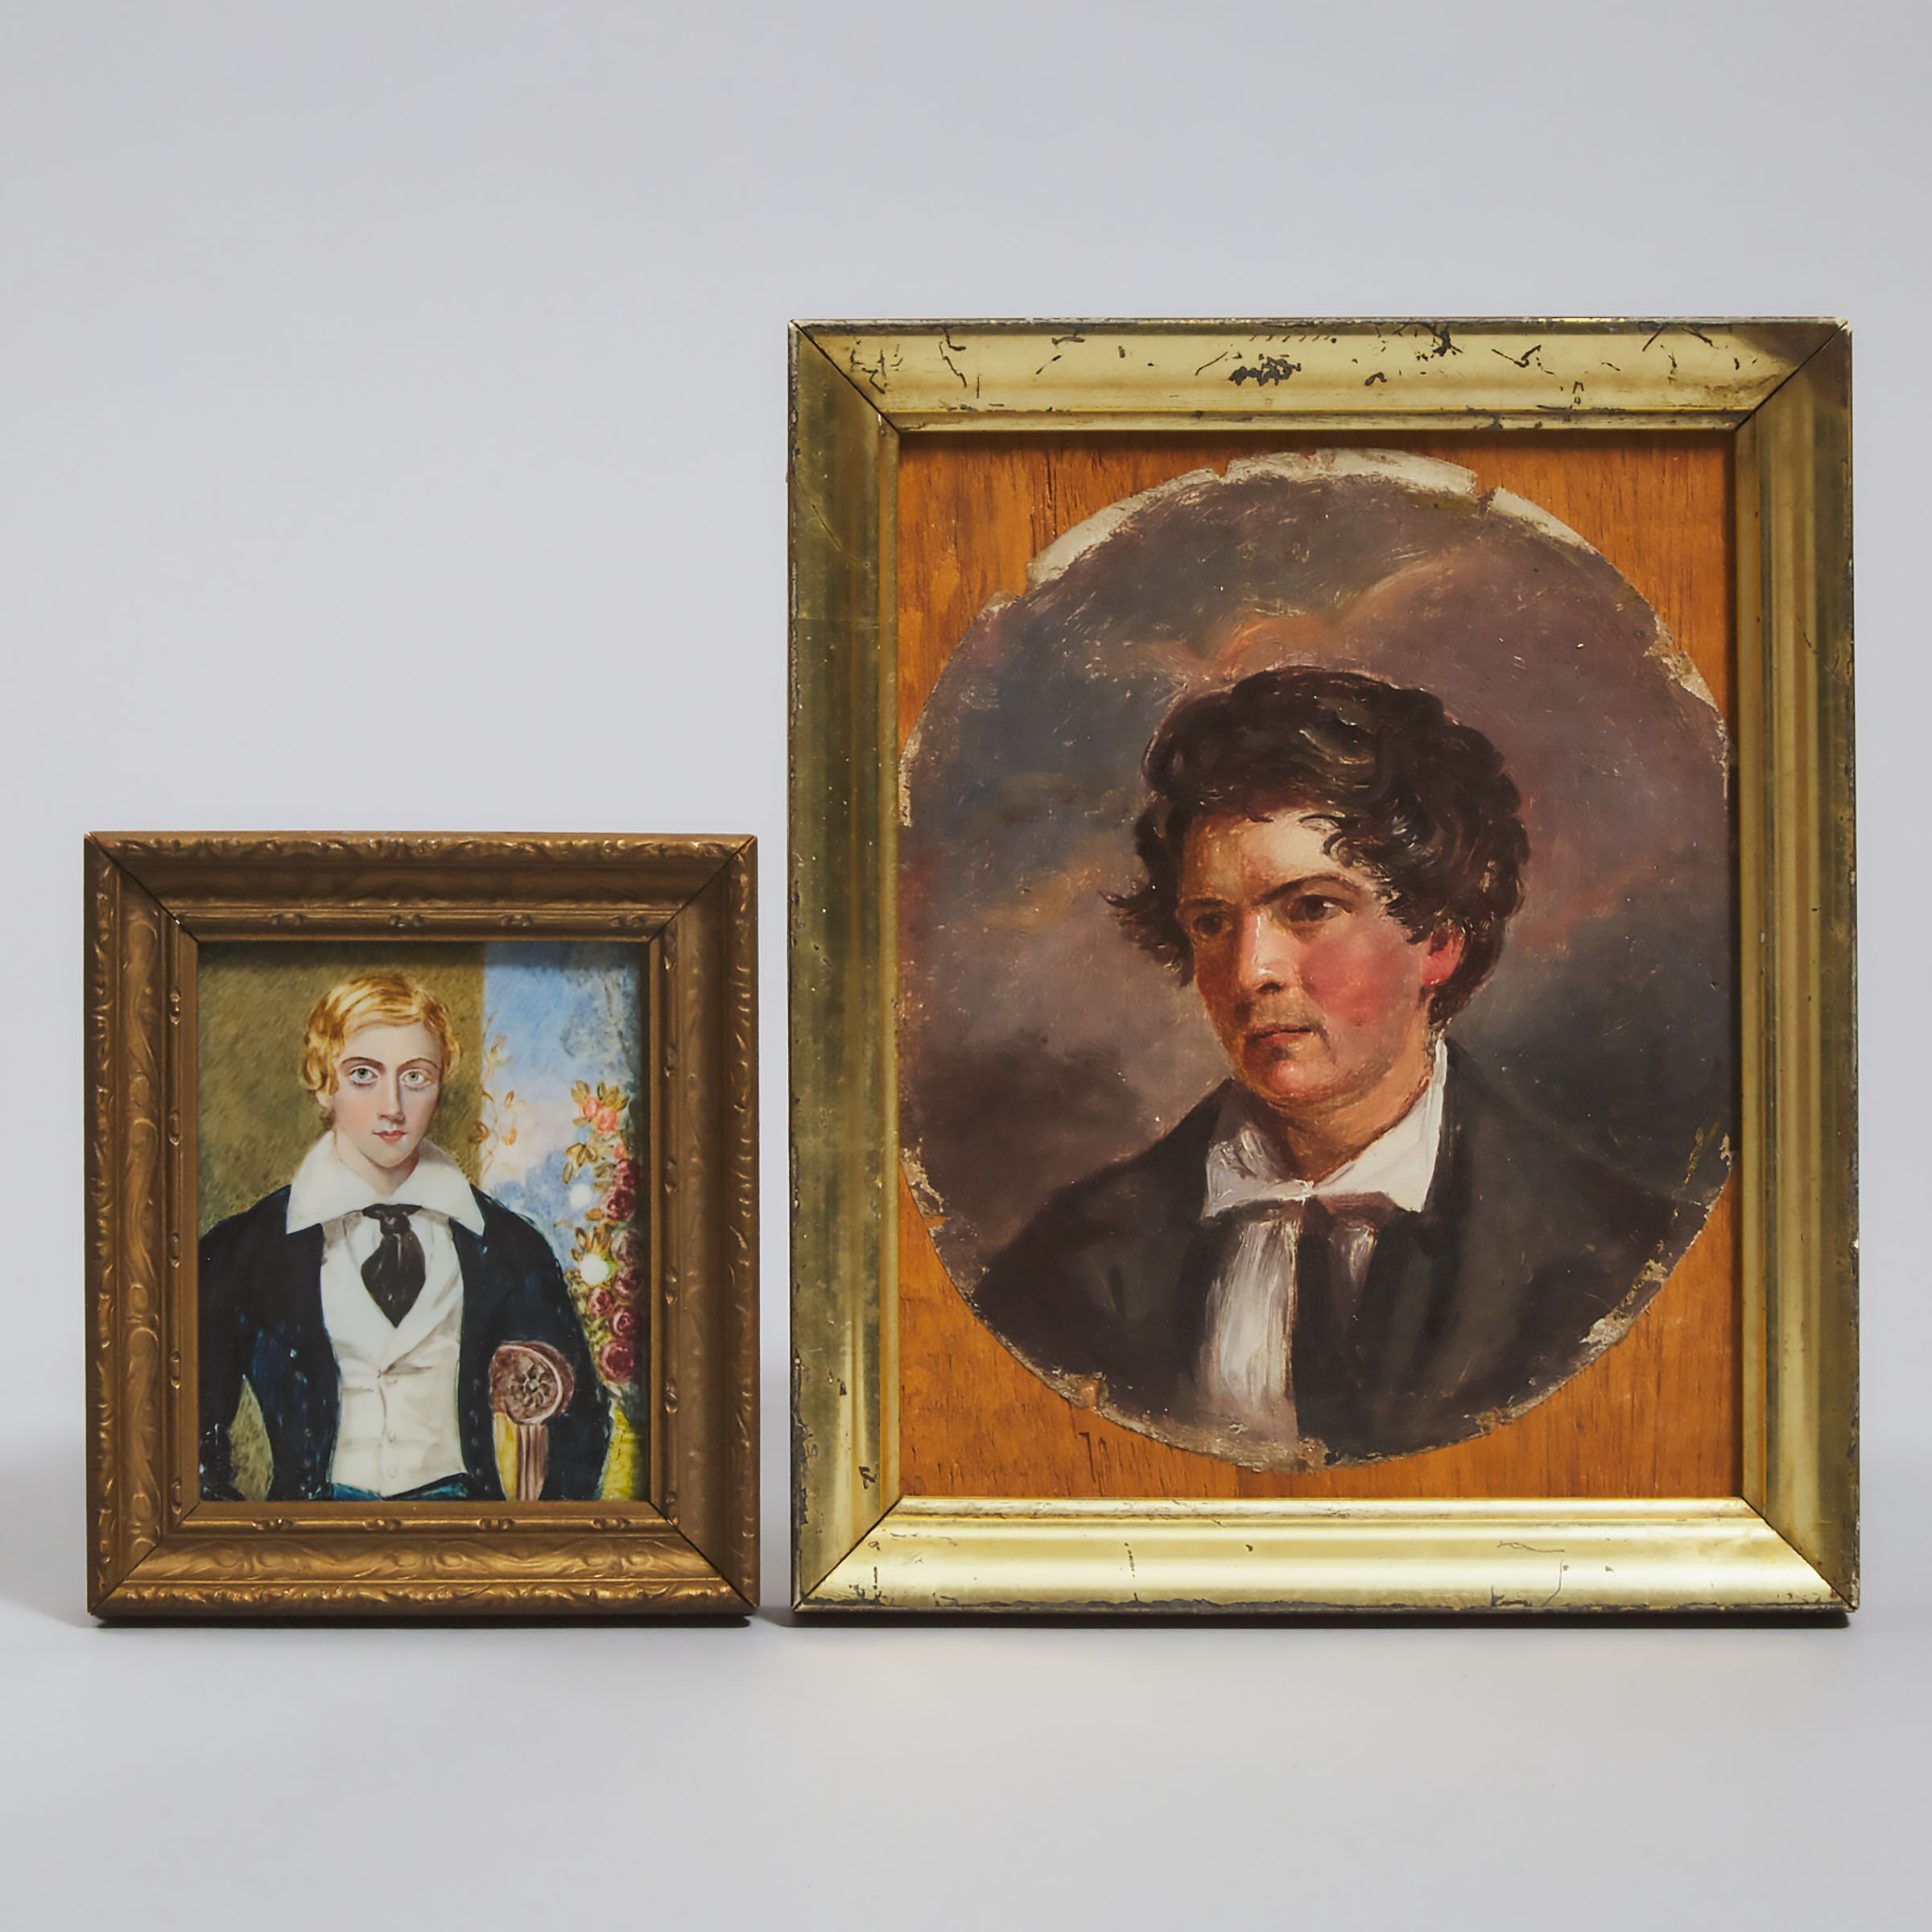 Two British School Portrait Miniatures of Young Men, early-mid 19th century